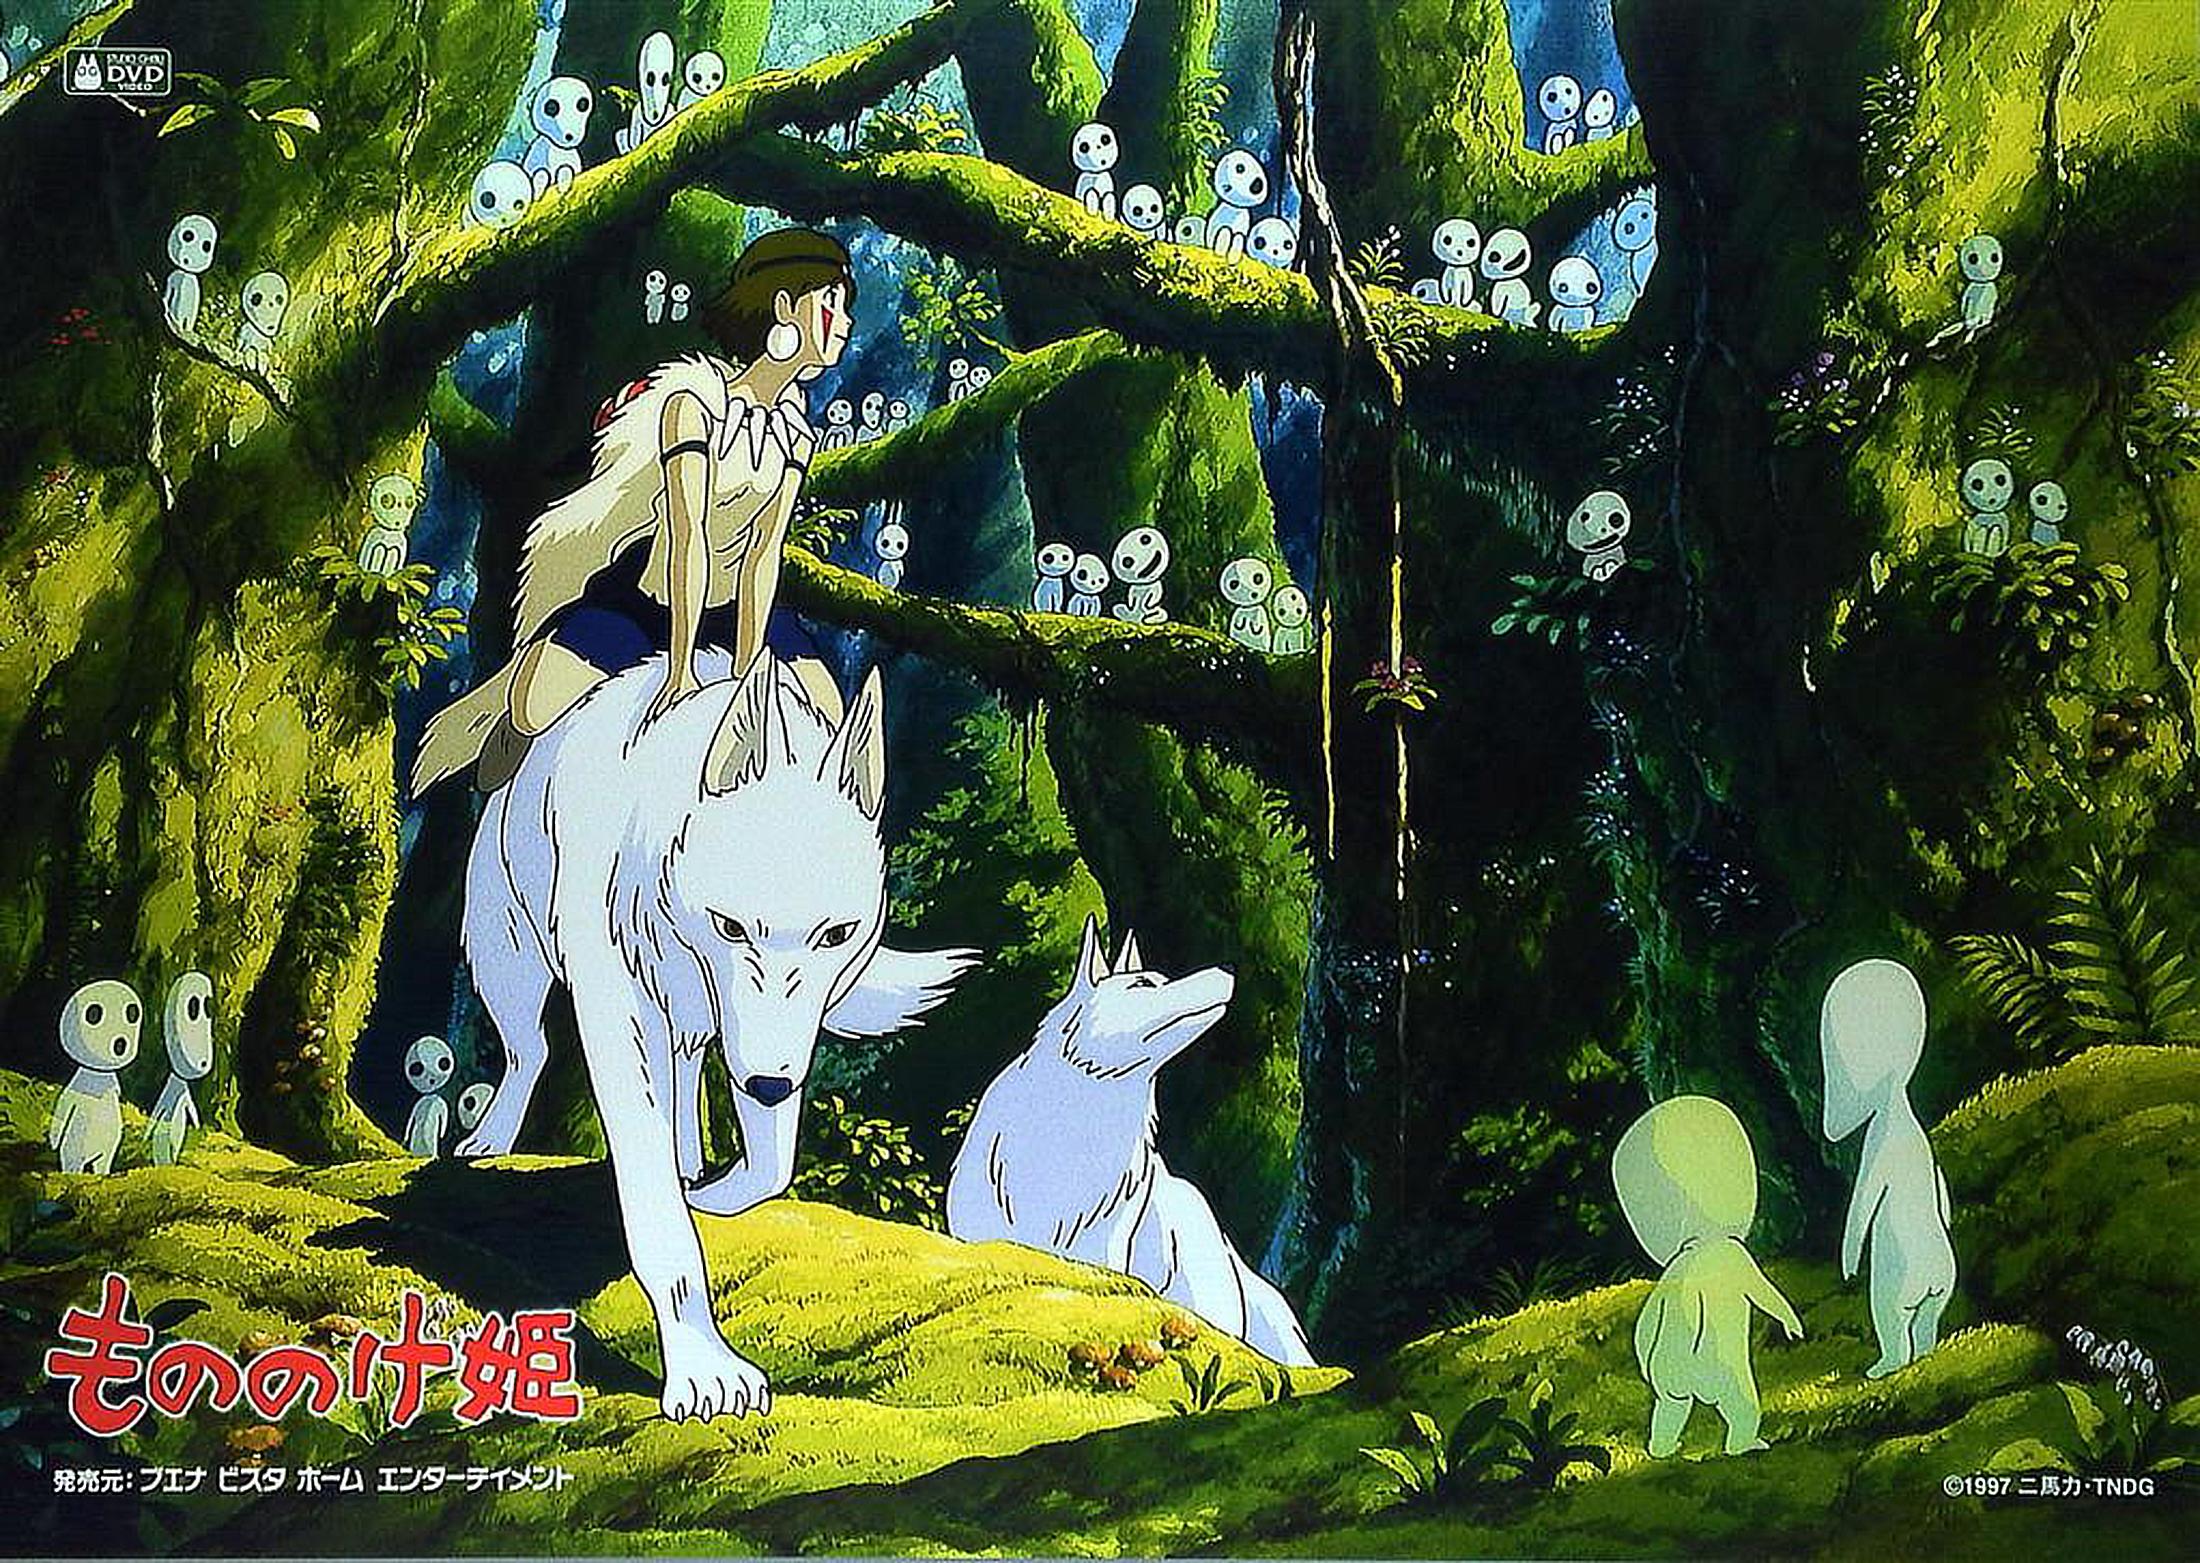 An original vintage poster from Studio Ghibli's 1997 animation Princess Mononoke, written and directed by the acclaimed Hayao Miyazaki.

This poster was a promotional item from Buena Vista Home Entertainment in Japan that was packaged with the DVD.